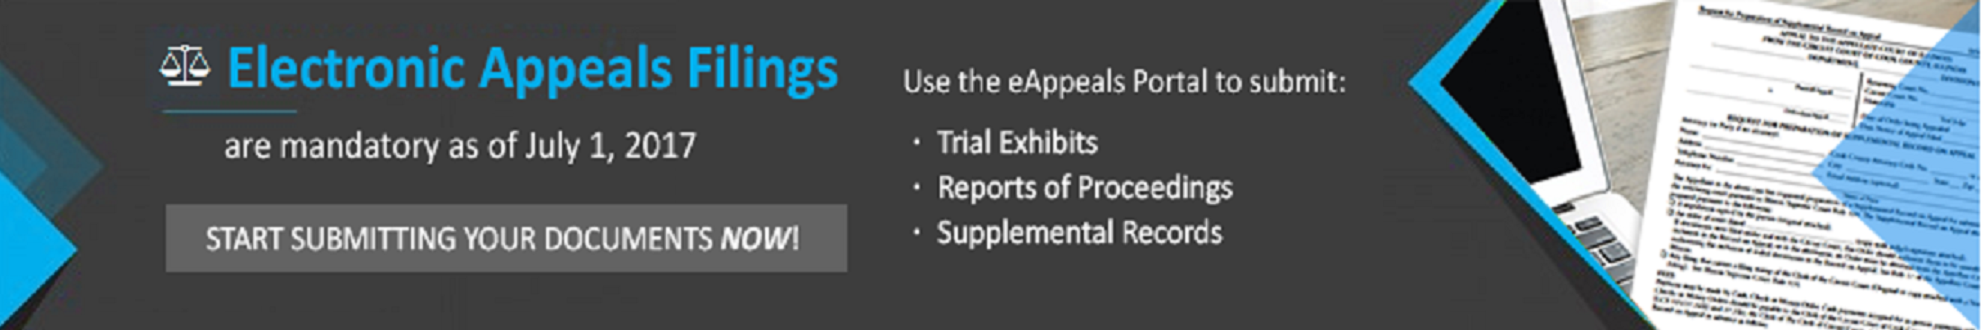 Start submitting your documents through the eAppeals Portal